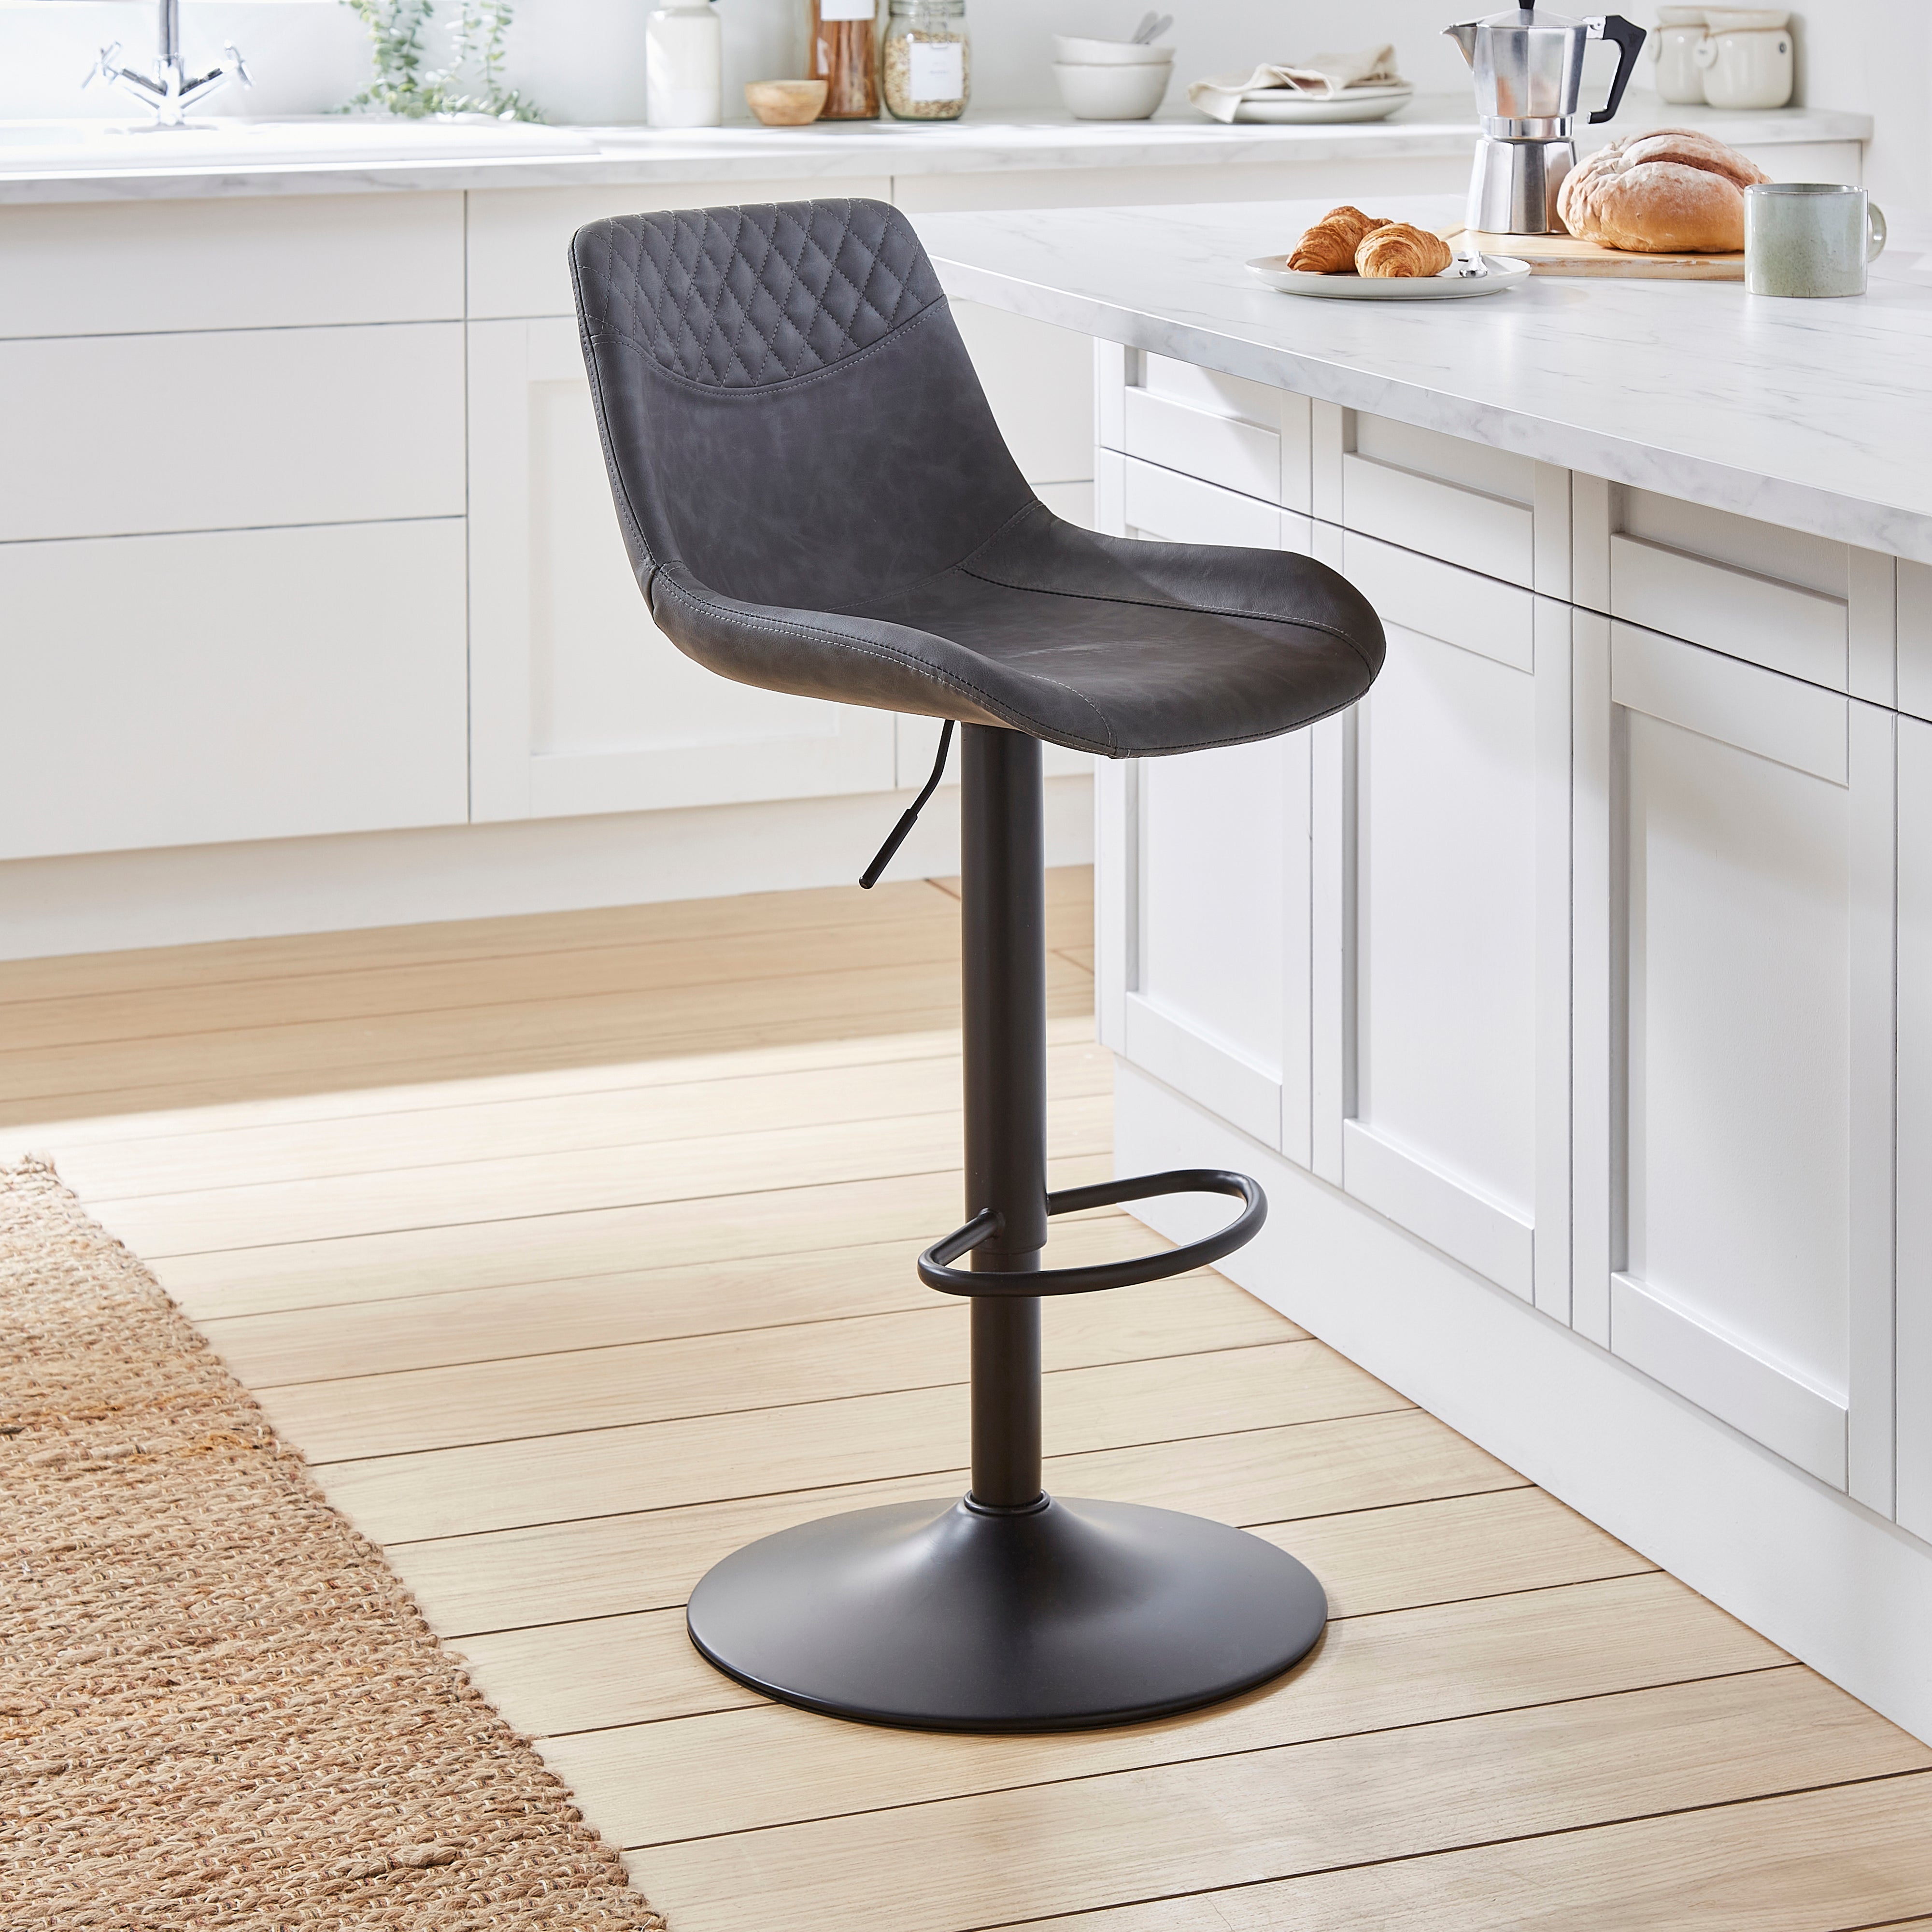 Walden Height Adjustable Bar Stool, Faux Leather Grey